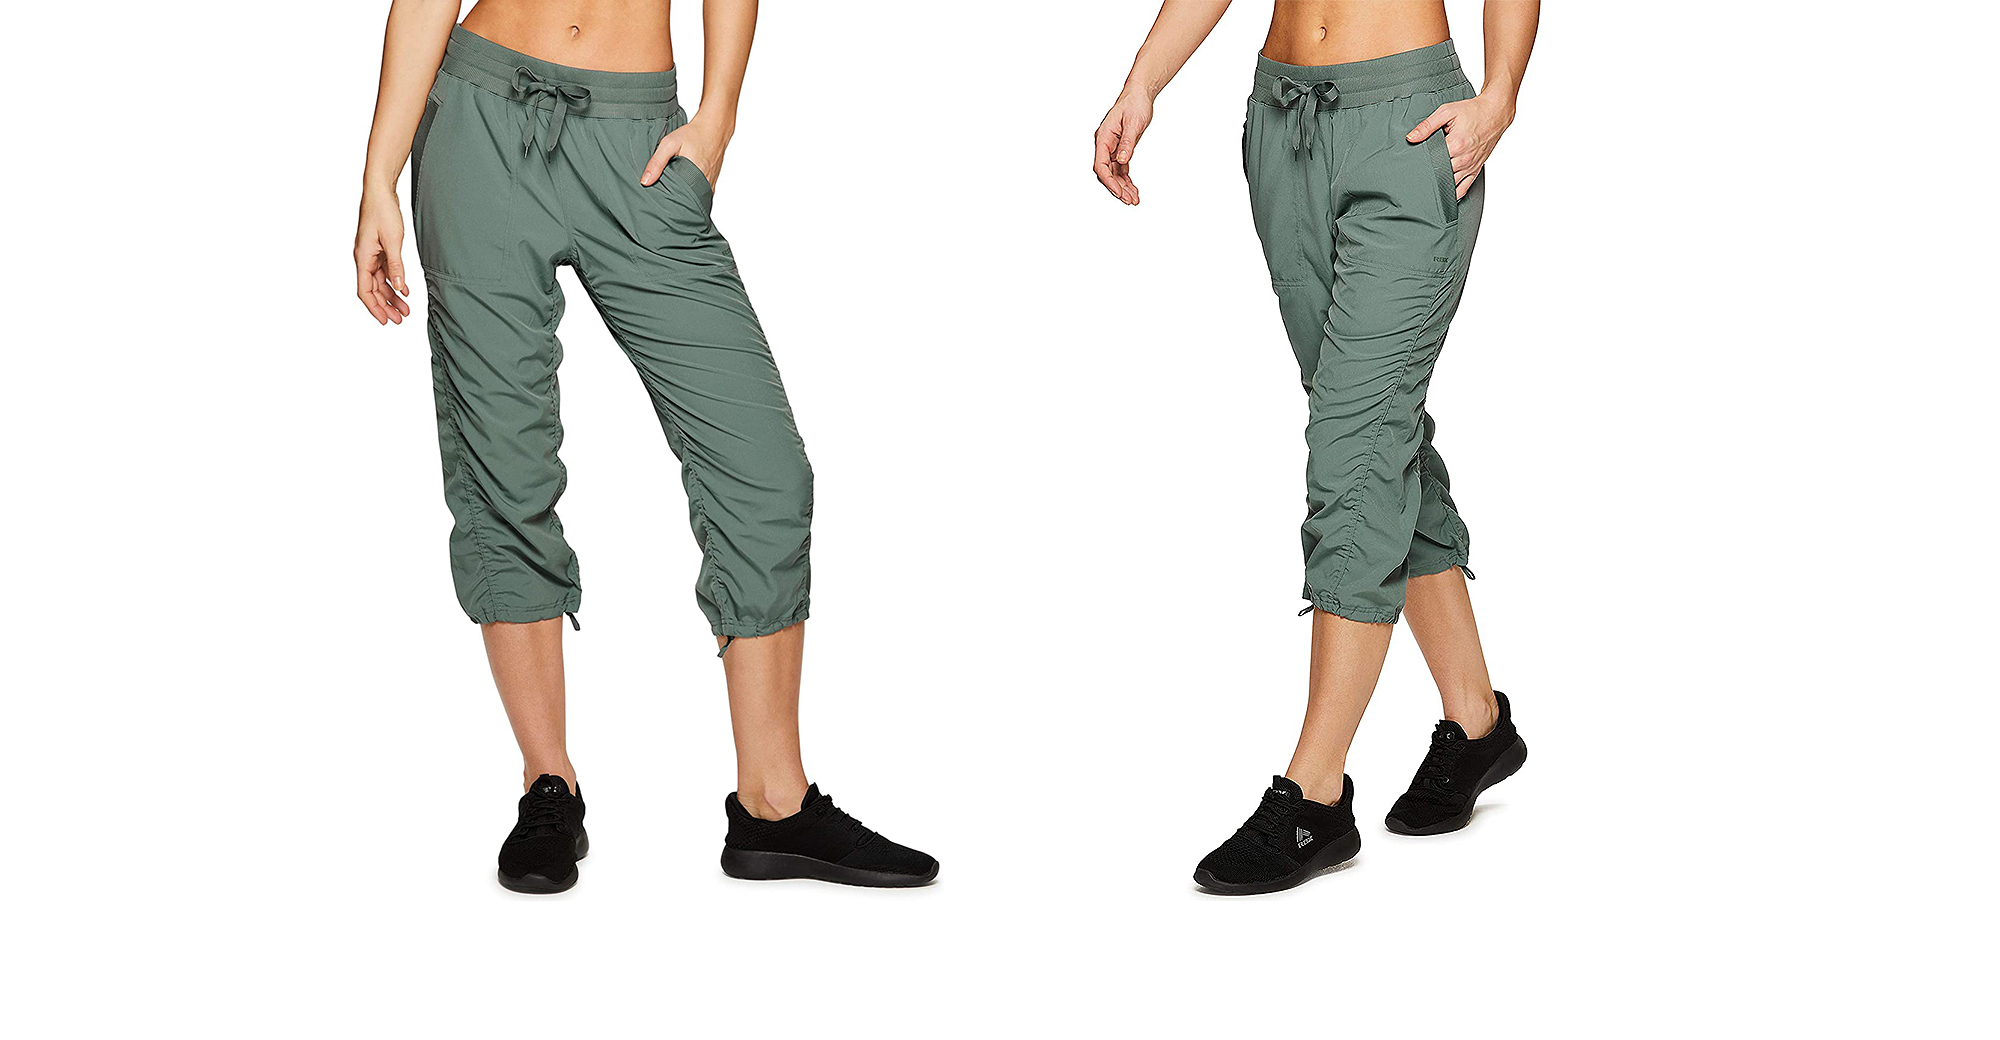 How to Style Cropped Trousers  UKNews